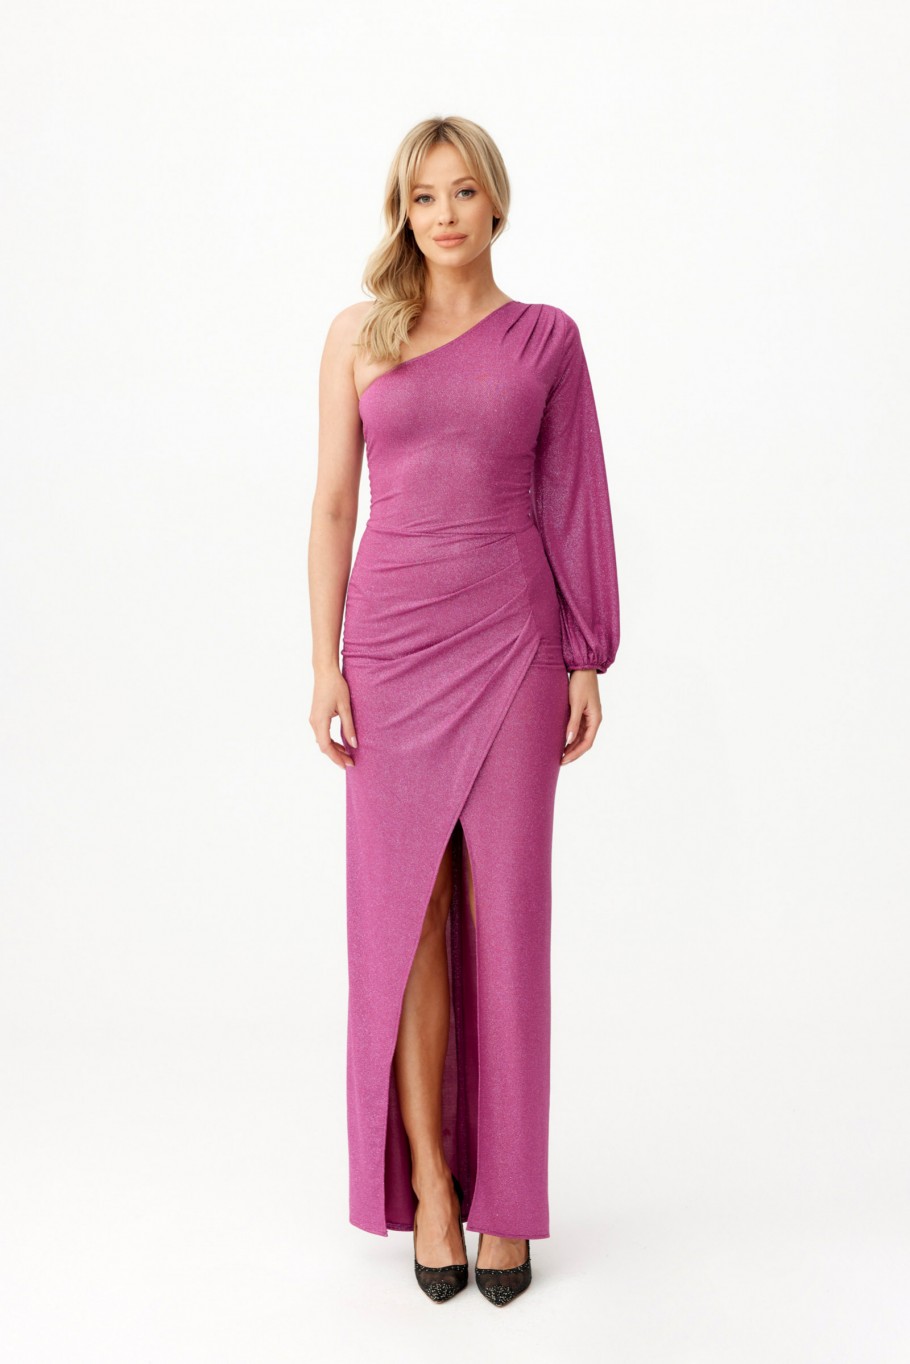 Natalie - glitter maxi dress with one-shoulder sleeves JAG